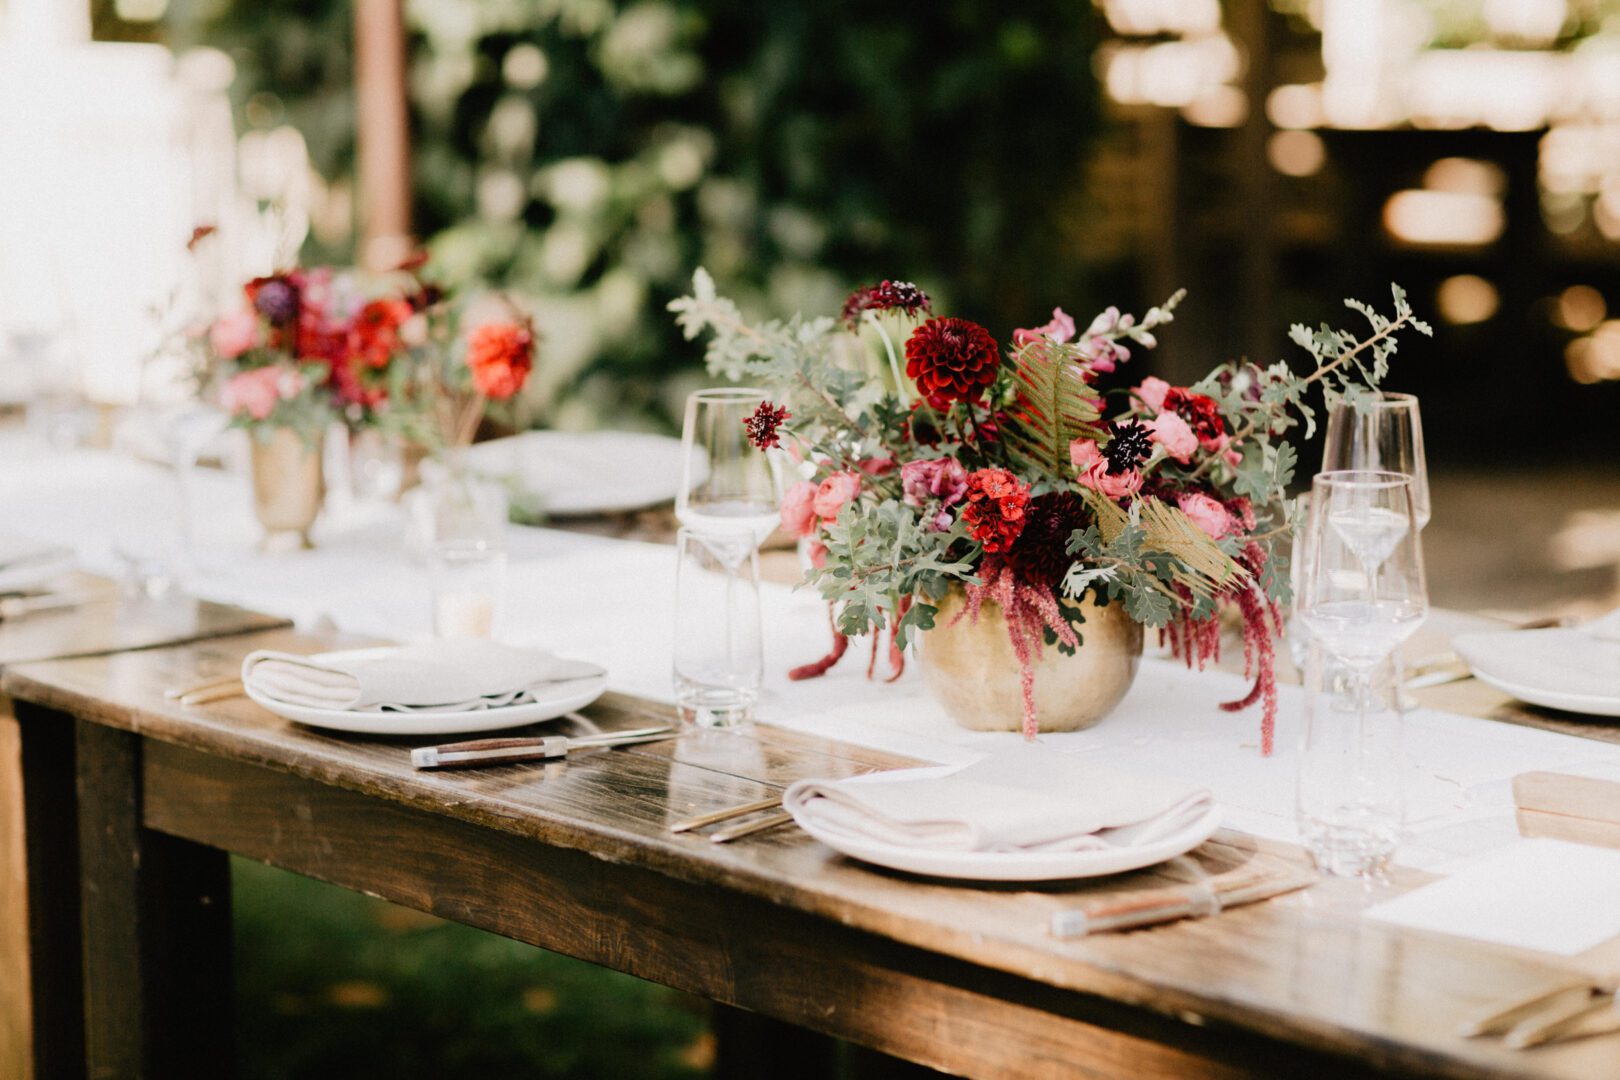 A wooden table with flowers and plates on it.